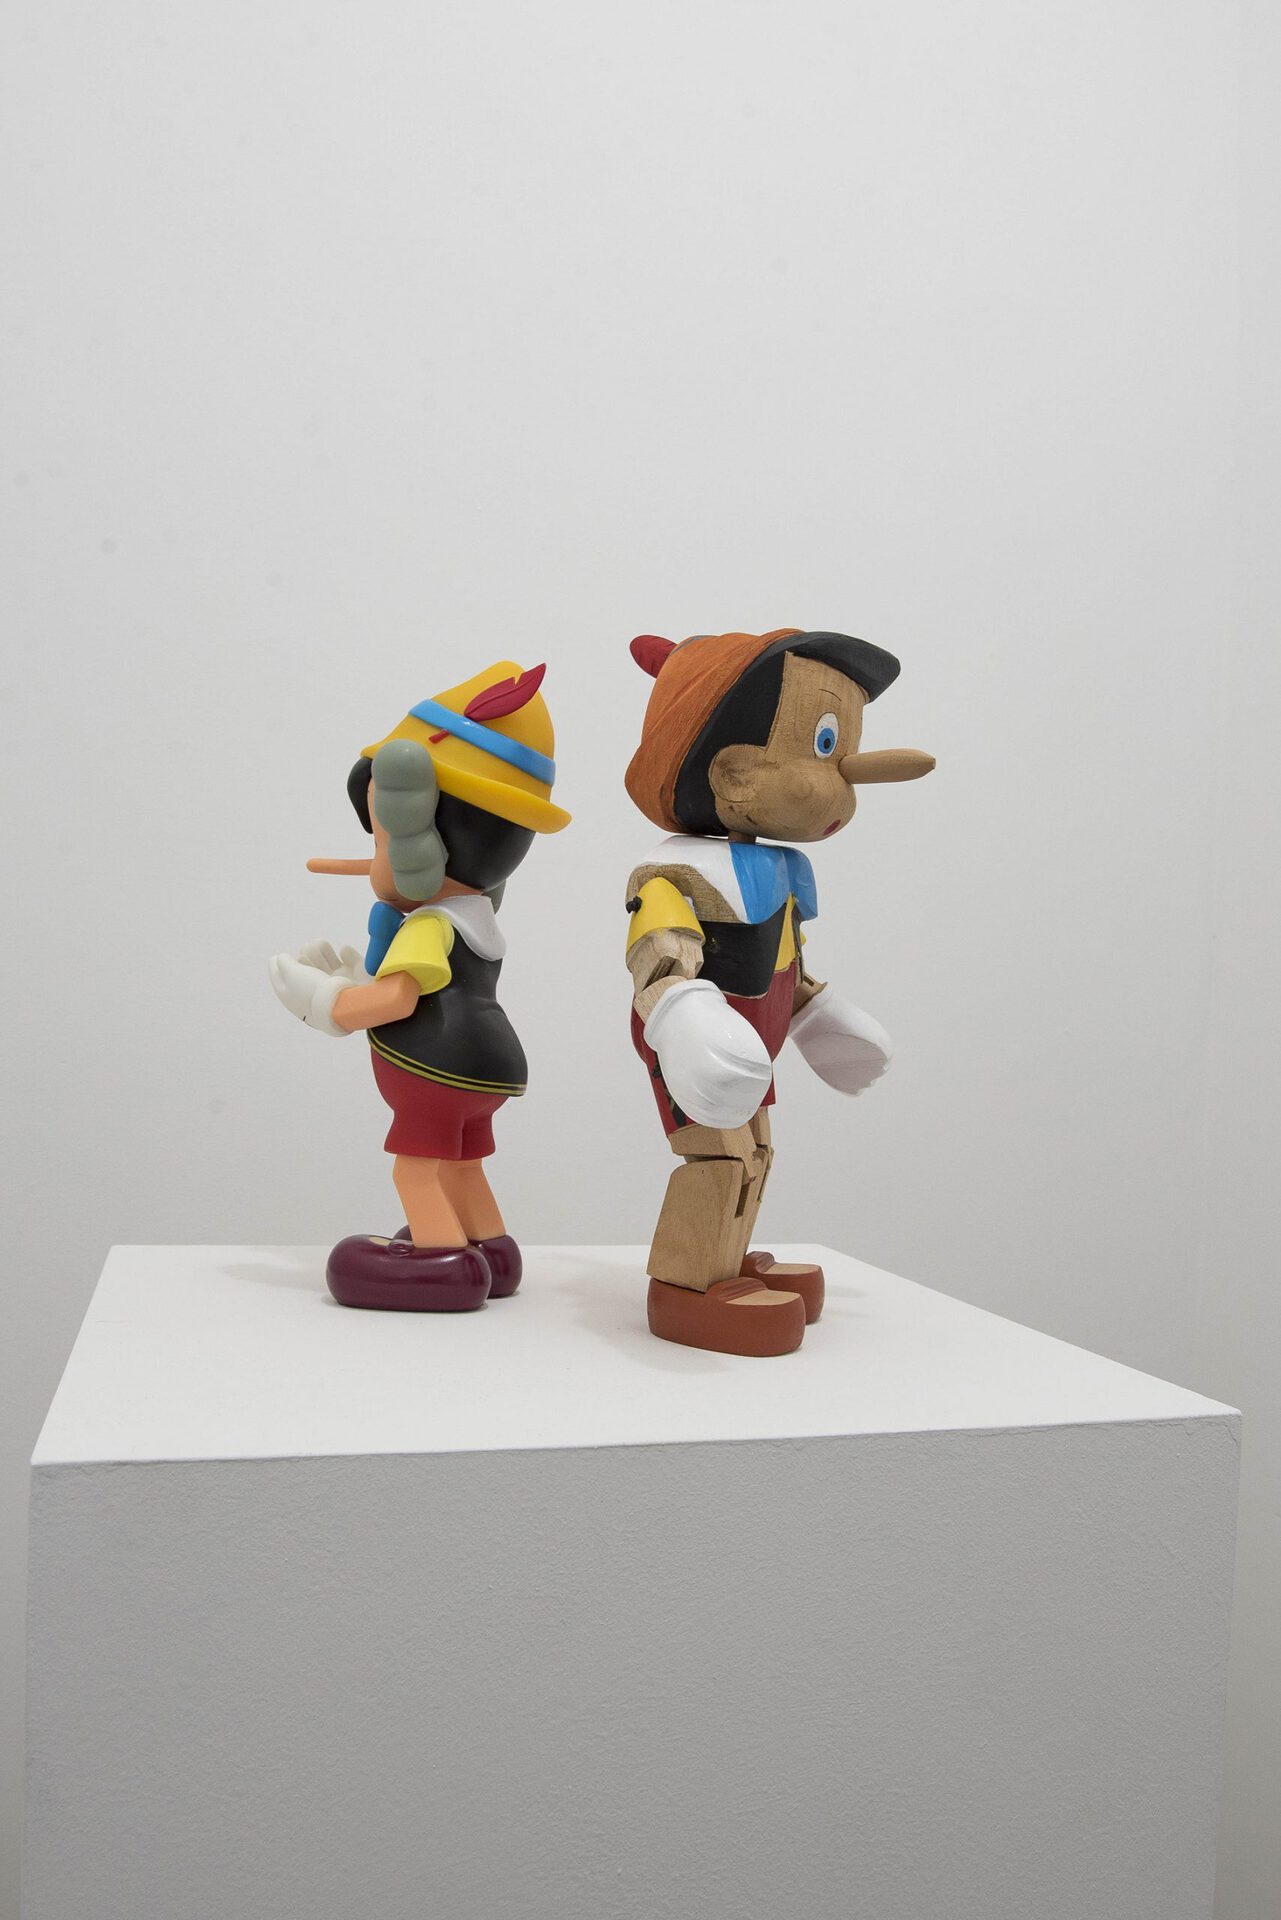 Marek Wolfryd, I think I see you brother but the mist is thick 2020 KAWS vinyl Pinocchio collectable toy and wood Pinocchio puppet by unknown artist 29 x 29 x 17 cm.